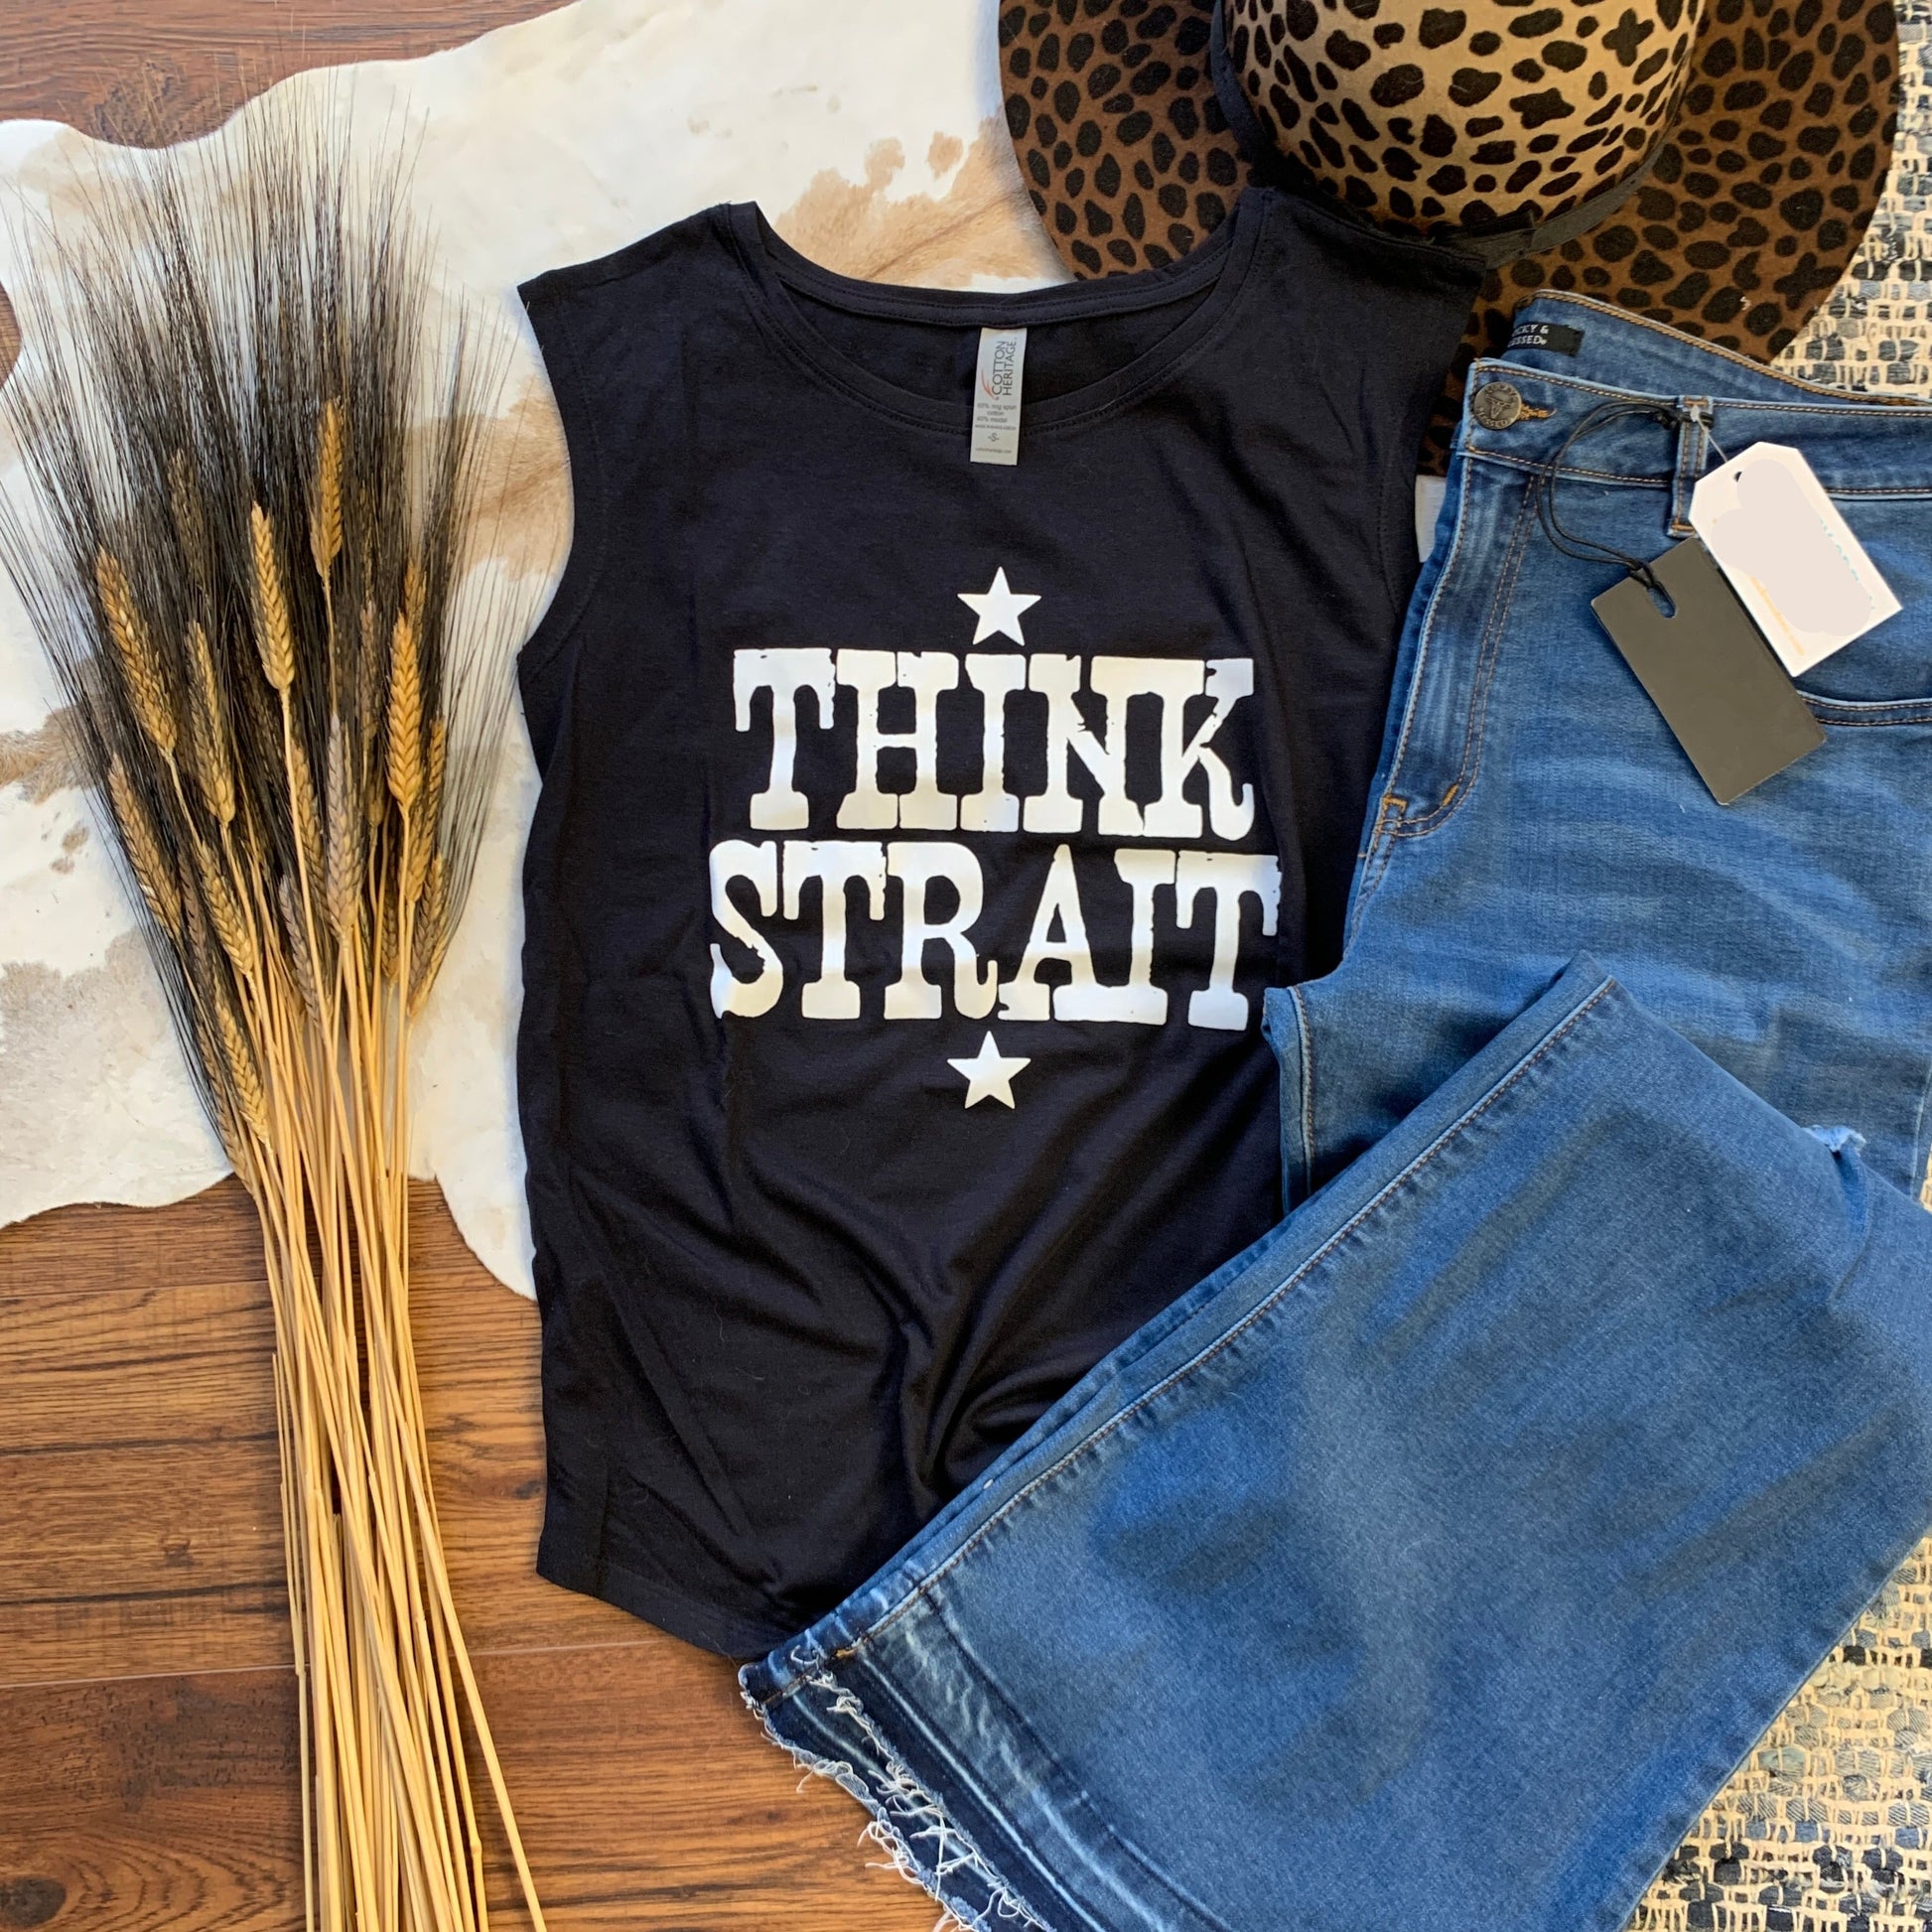 black muscle tank that says Think Strait in white lettering